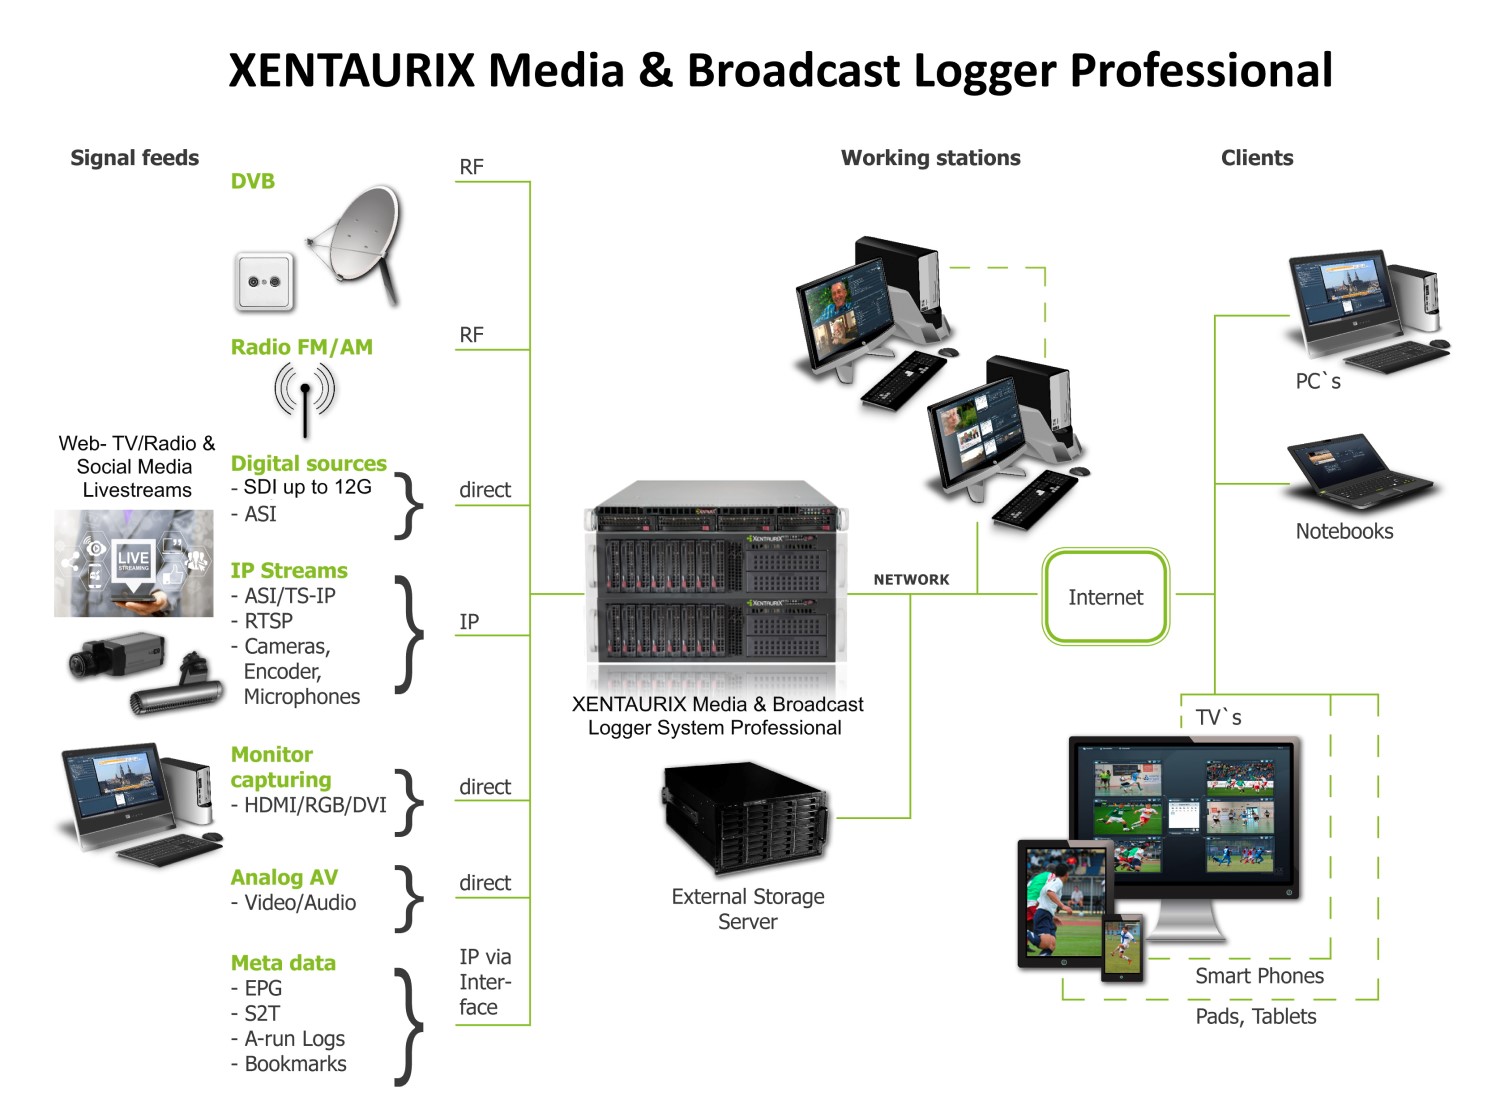 Media Broadcast Logger System for image + audio transmission in media, radio and television